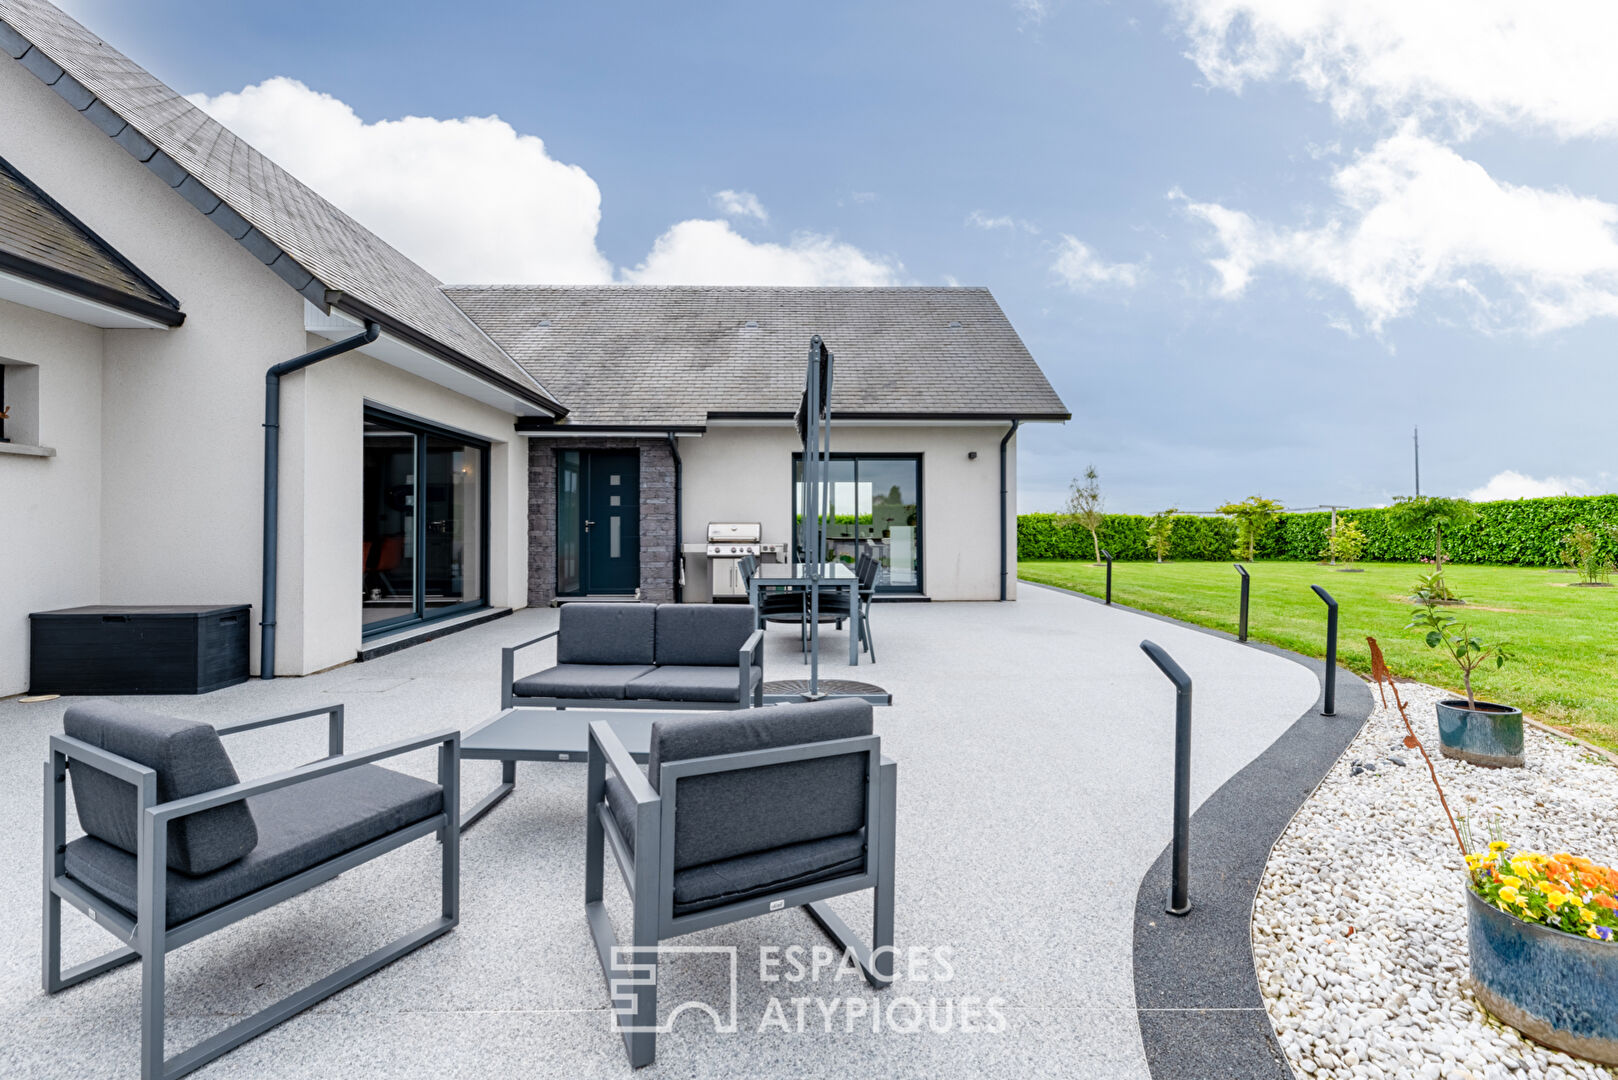 Contemporary family room on landscaped garden